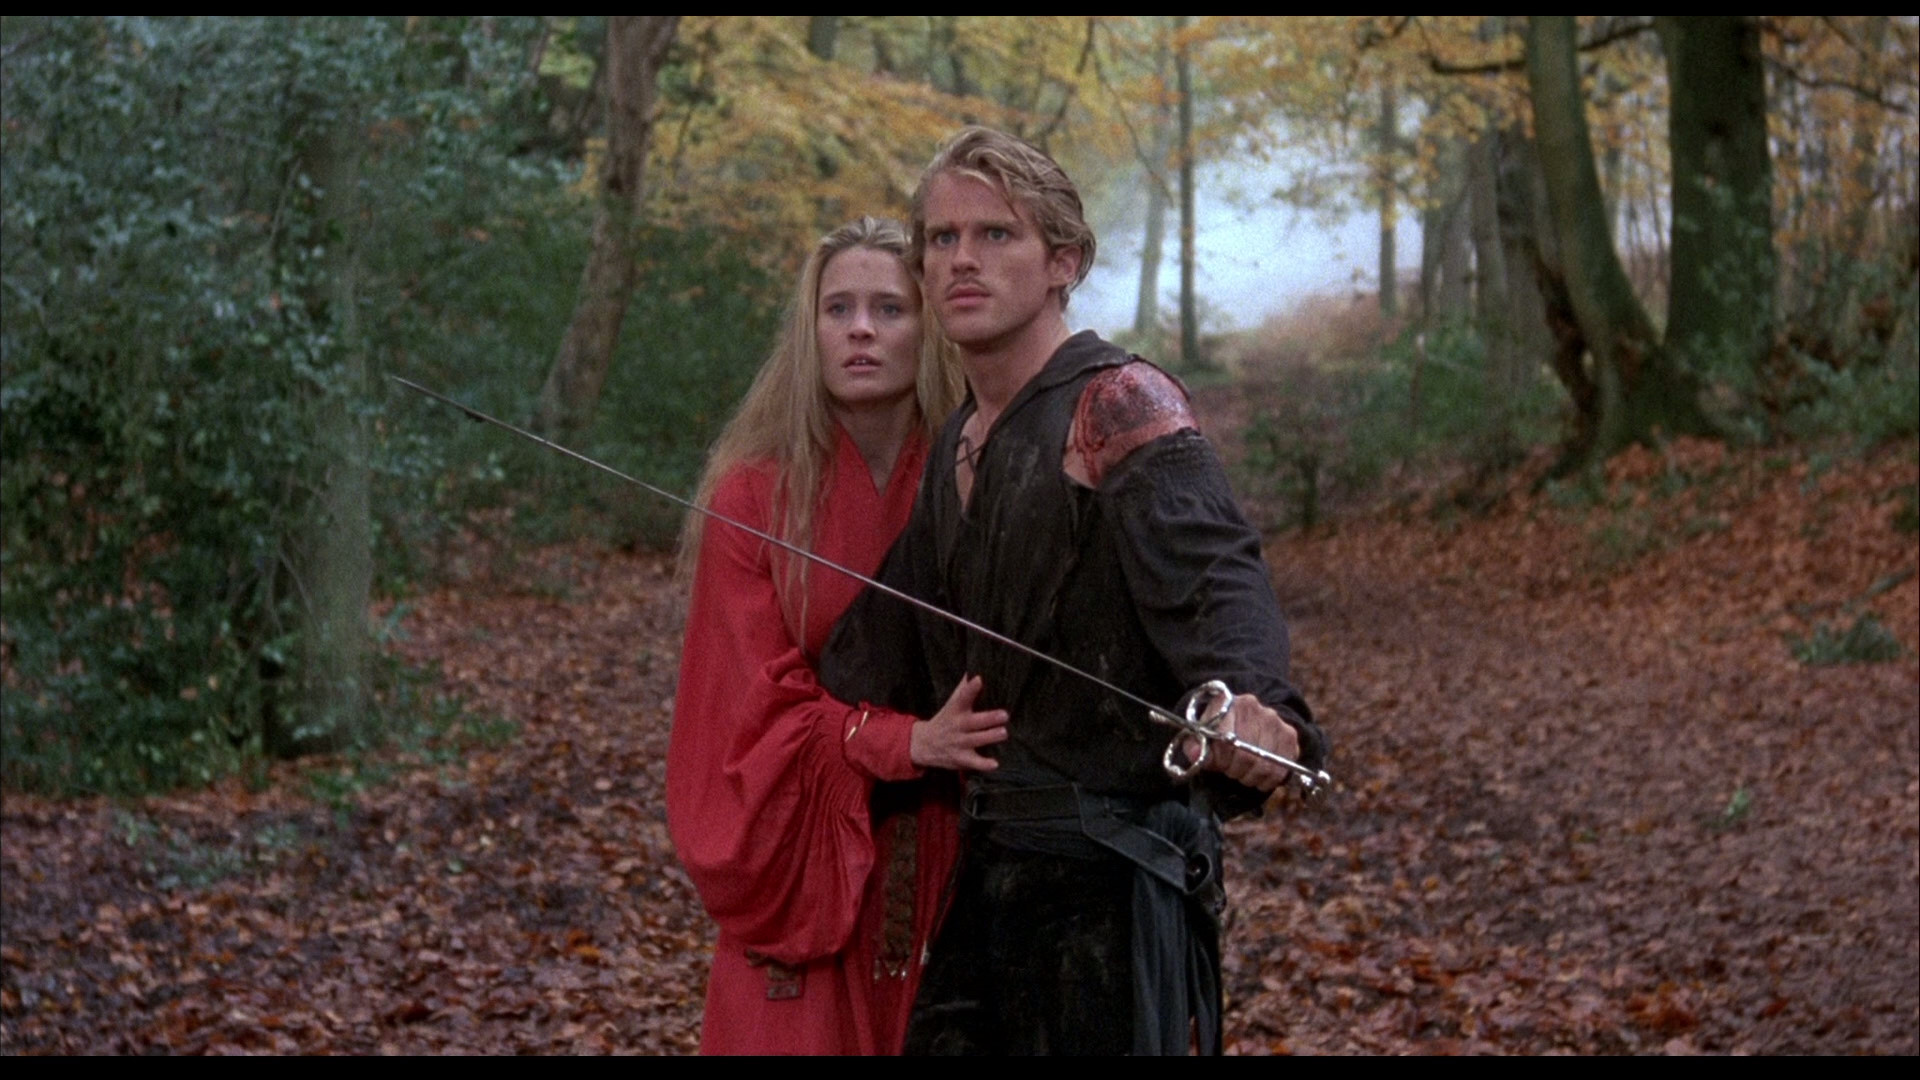 Amazing The Princess Bride Pictures & Backgrounds